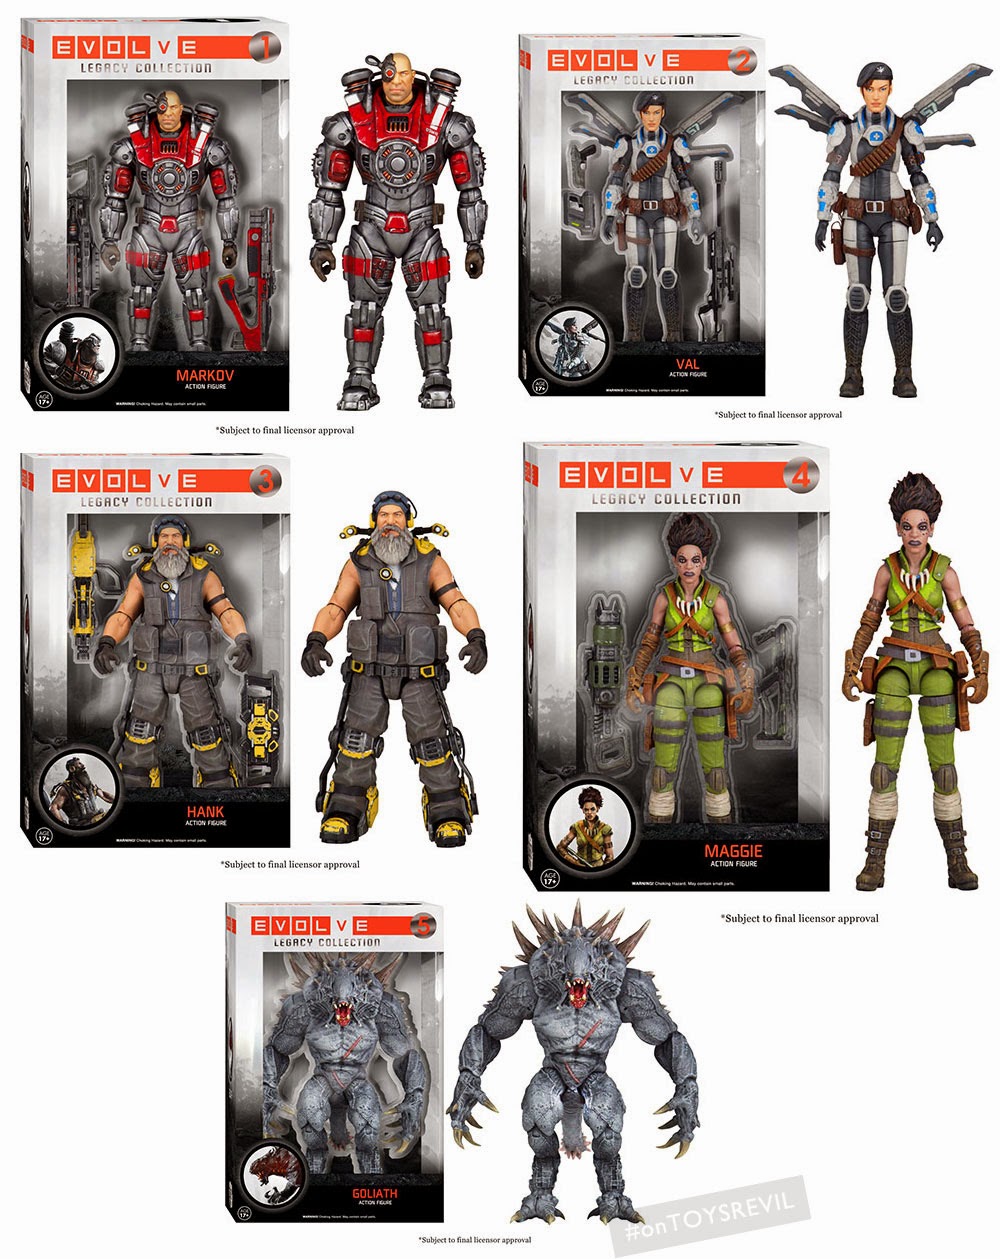 evolve legacy collection